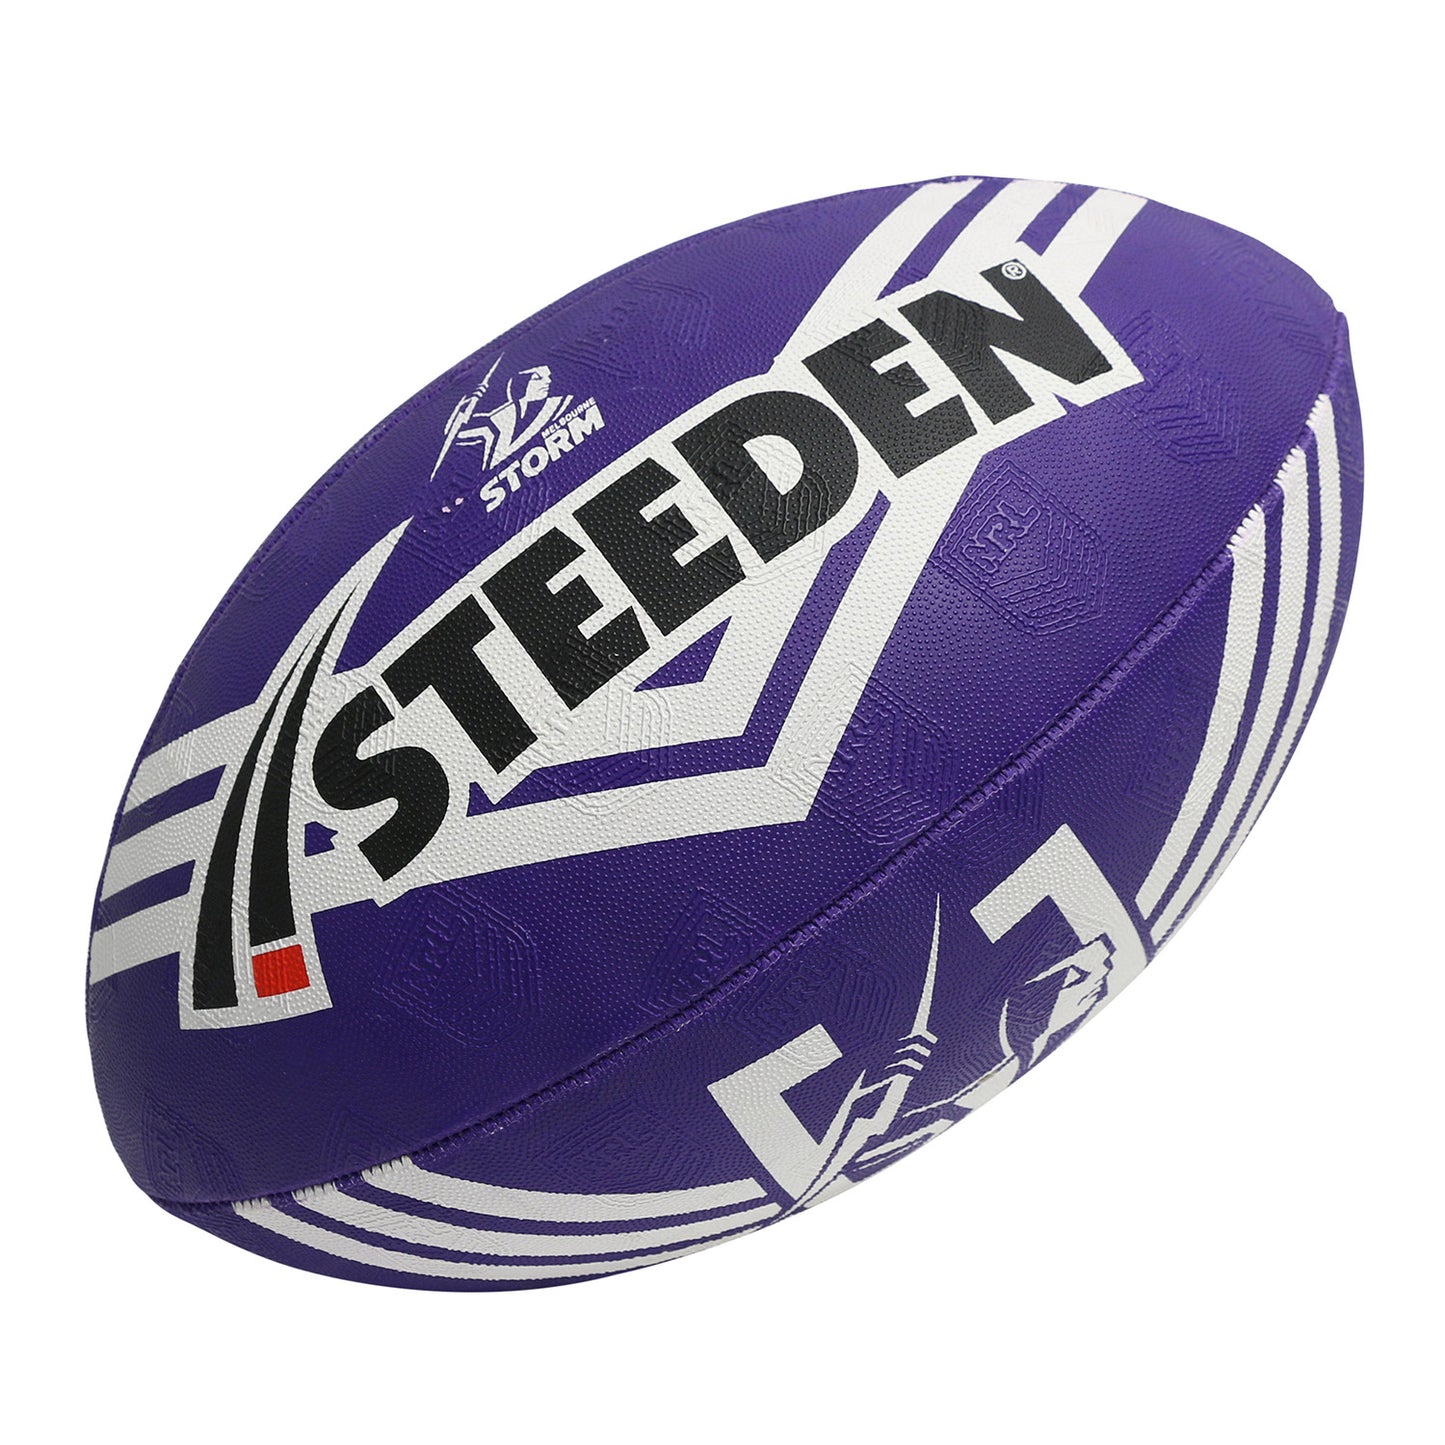 Melbourne Storm Supporter Ball